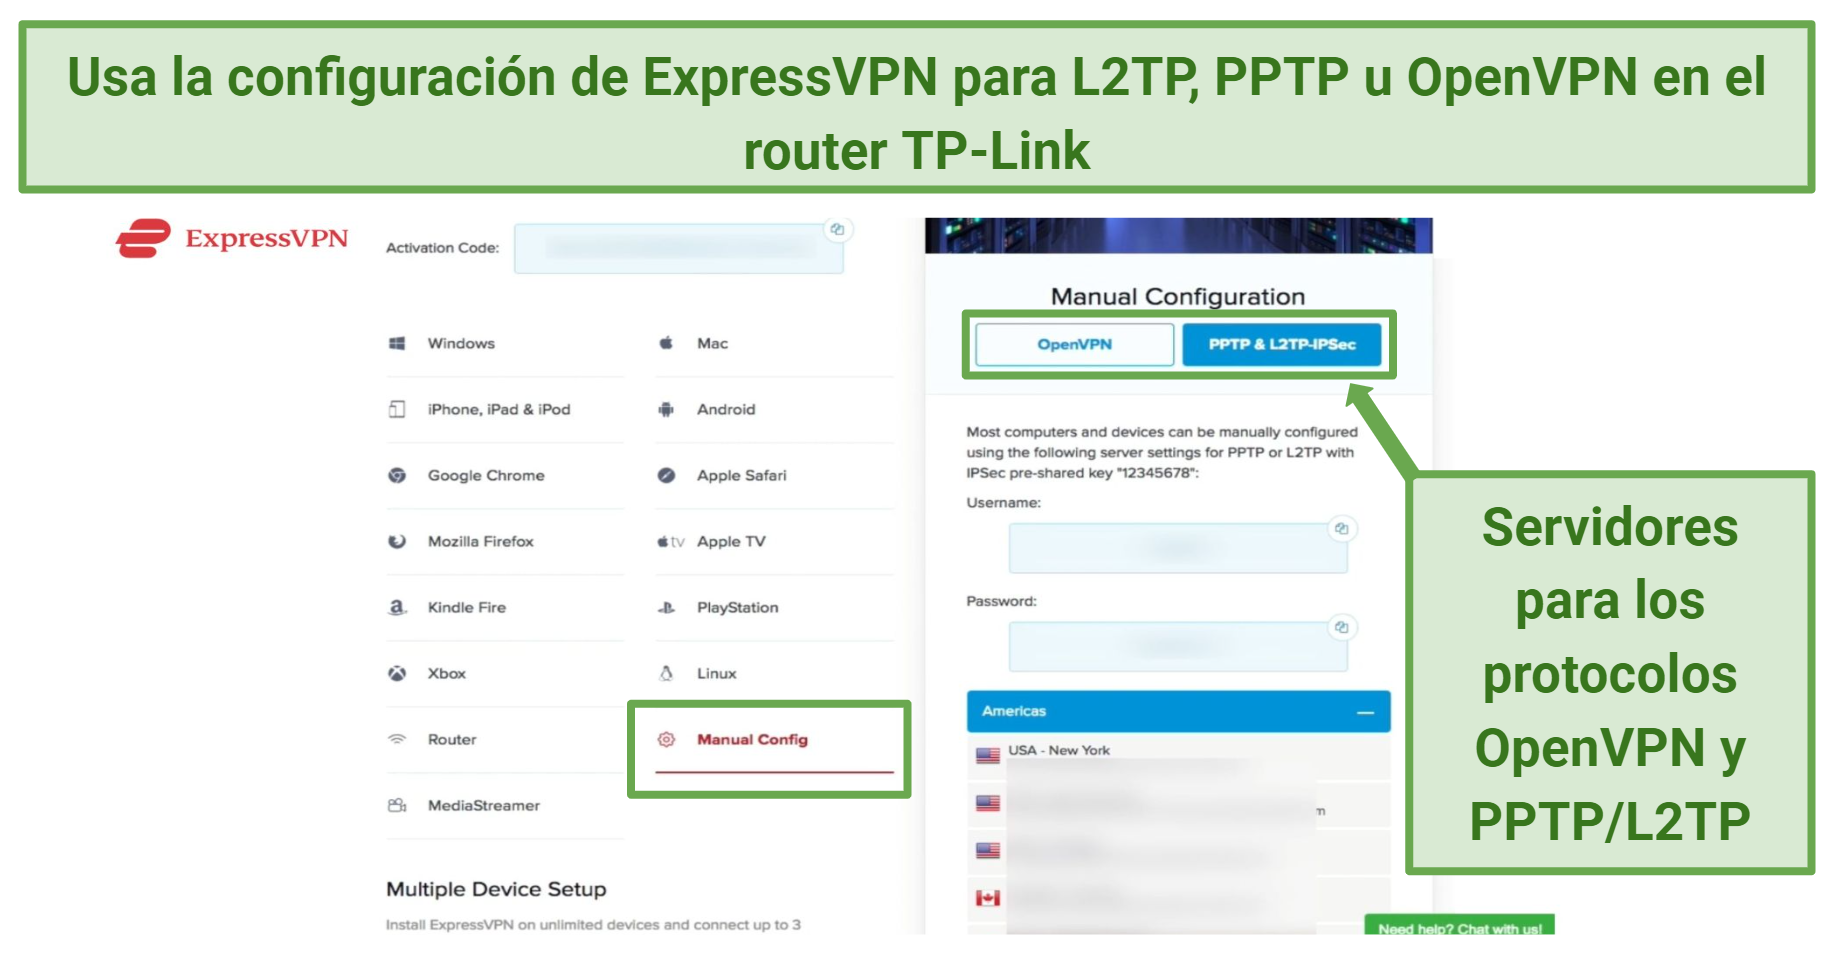 Image of ExpressVPN's OpenVPN and PPTP/IPSec servers for routers